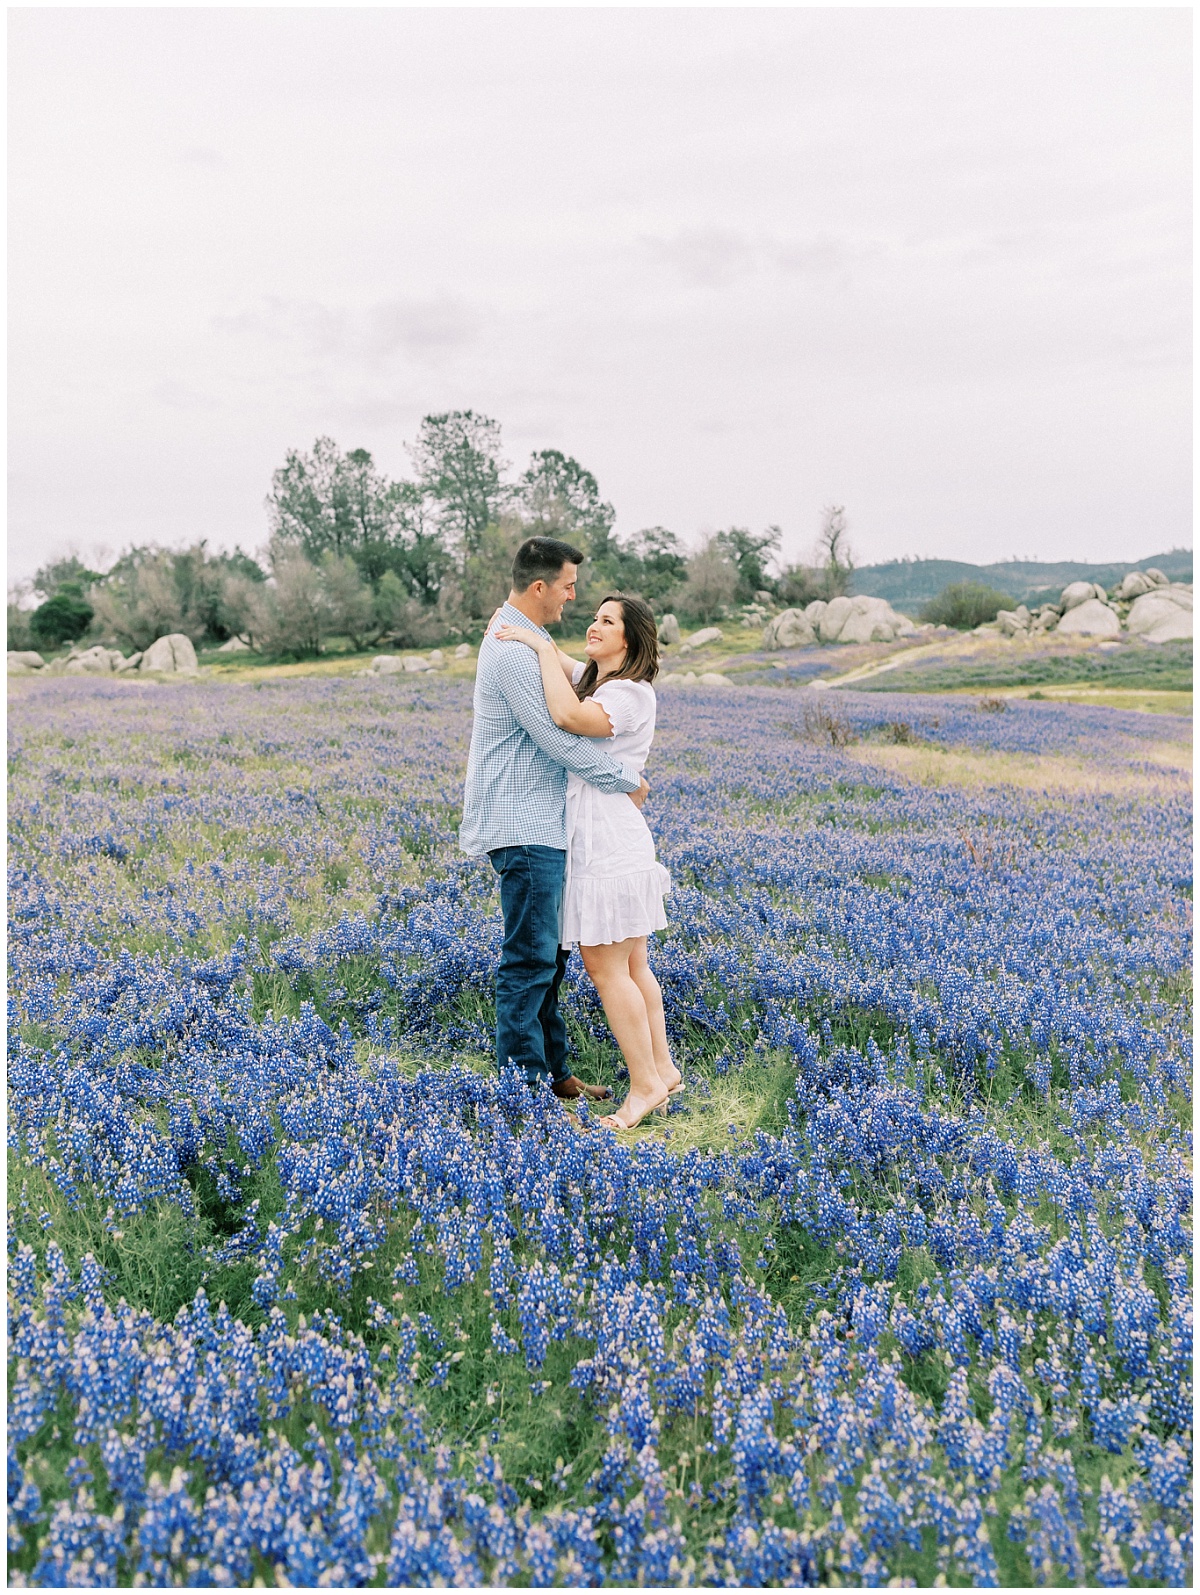 Engagement Photos in the Lupine